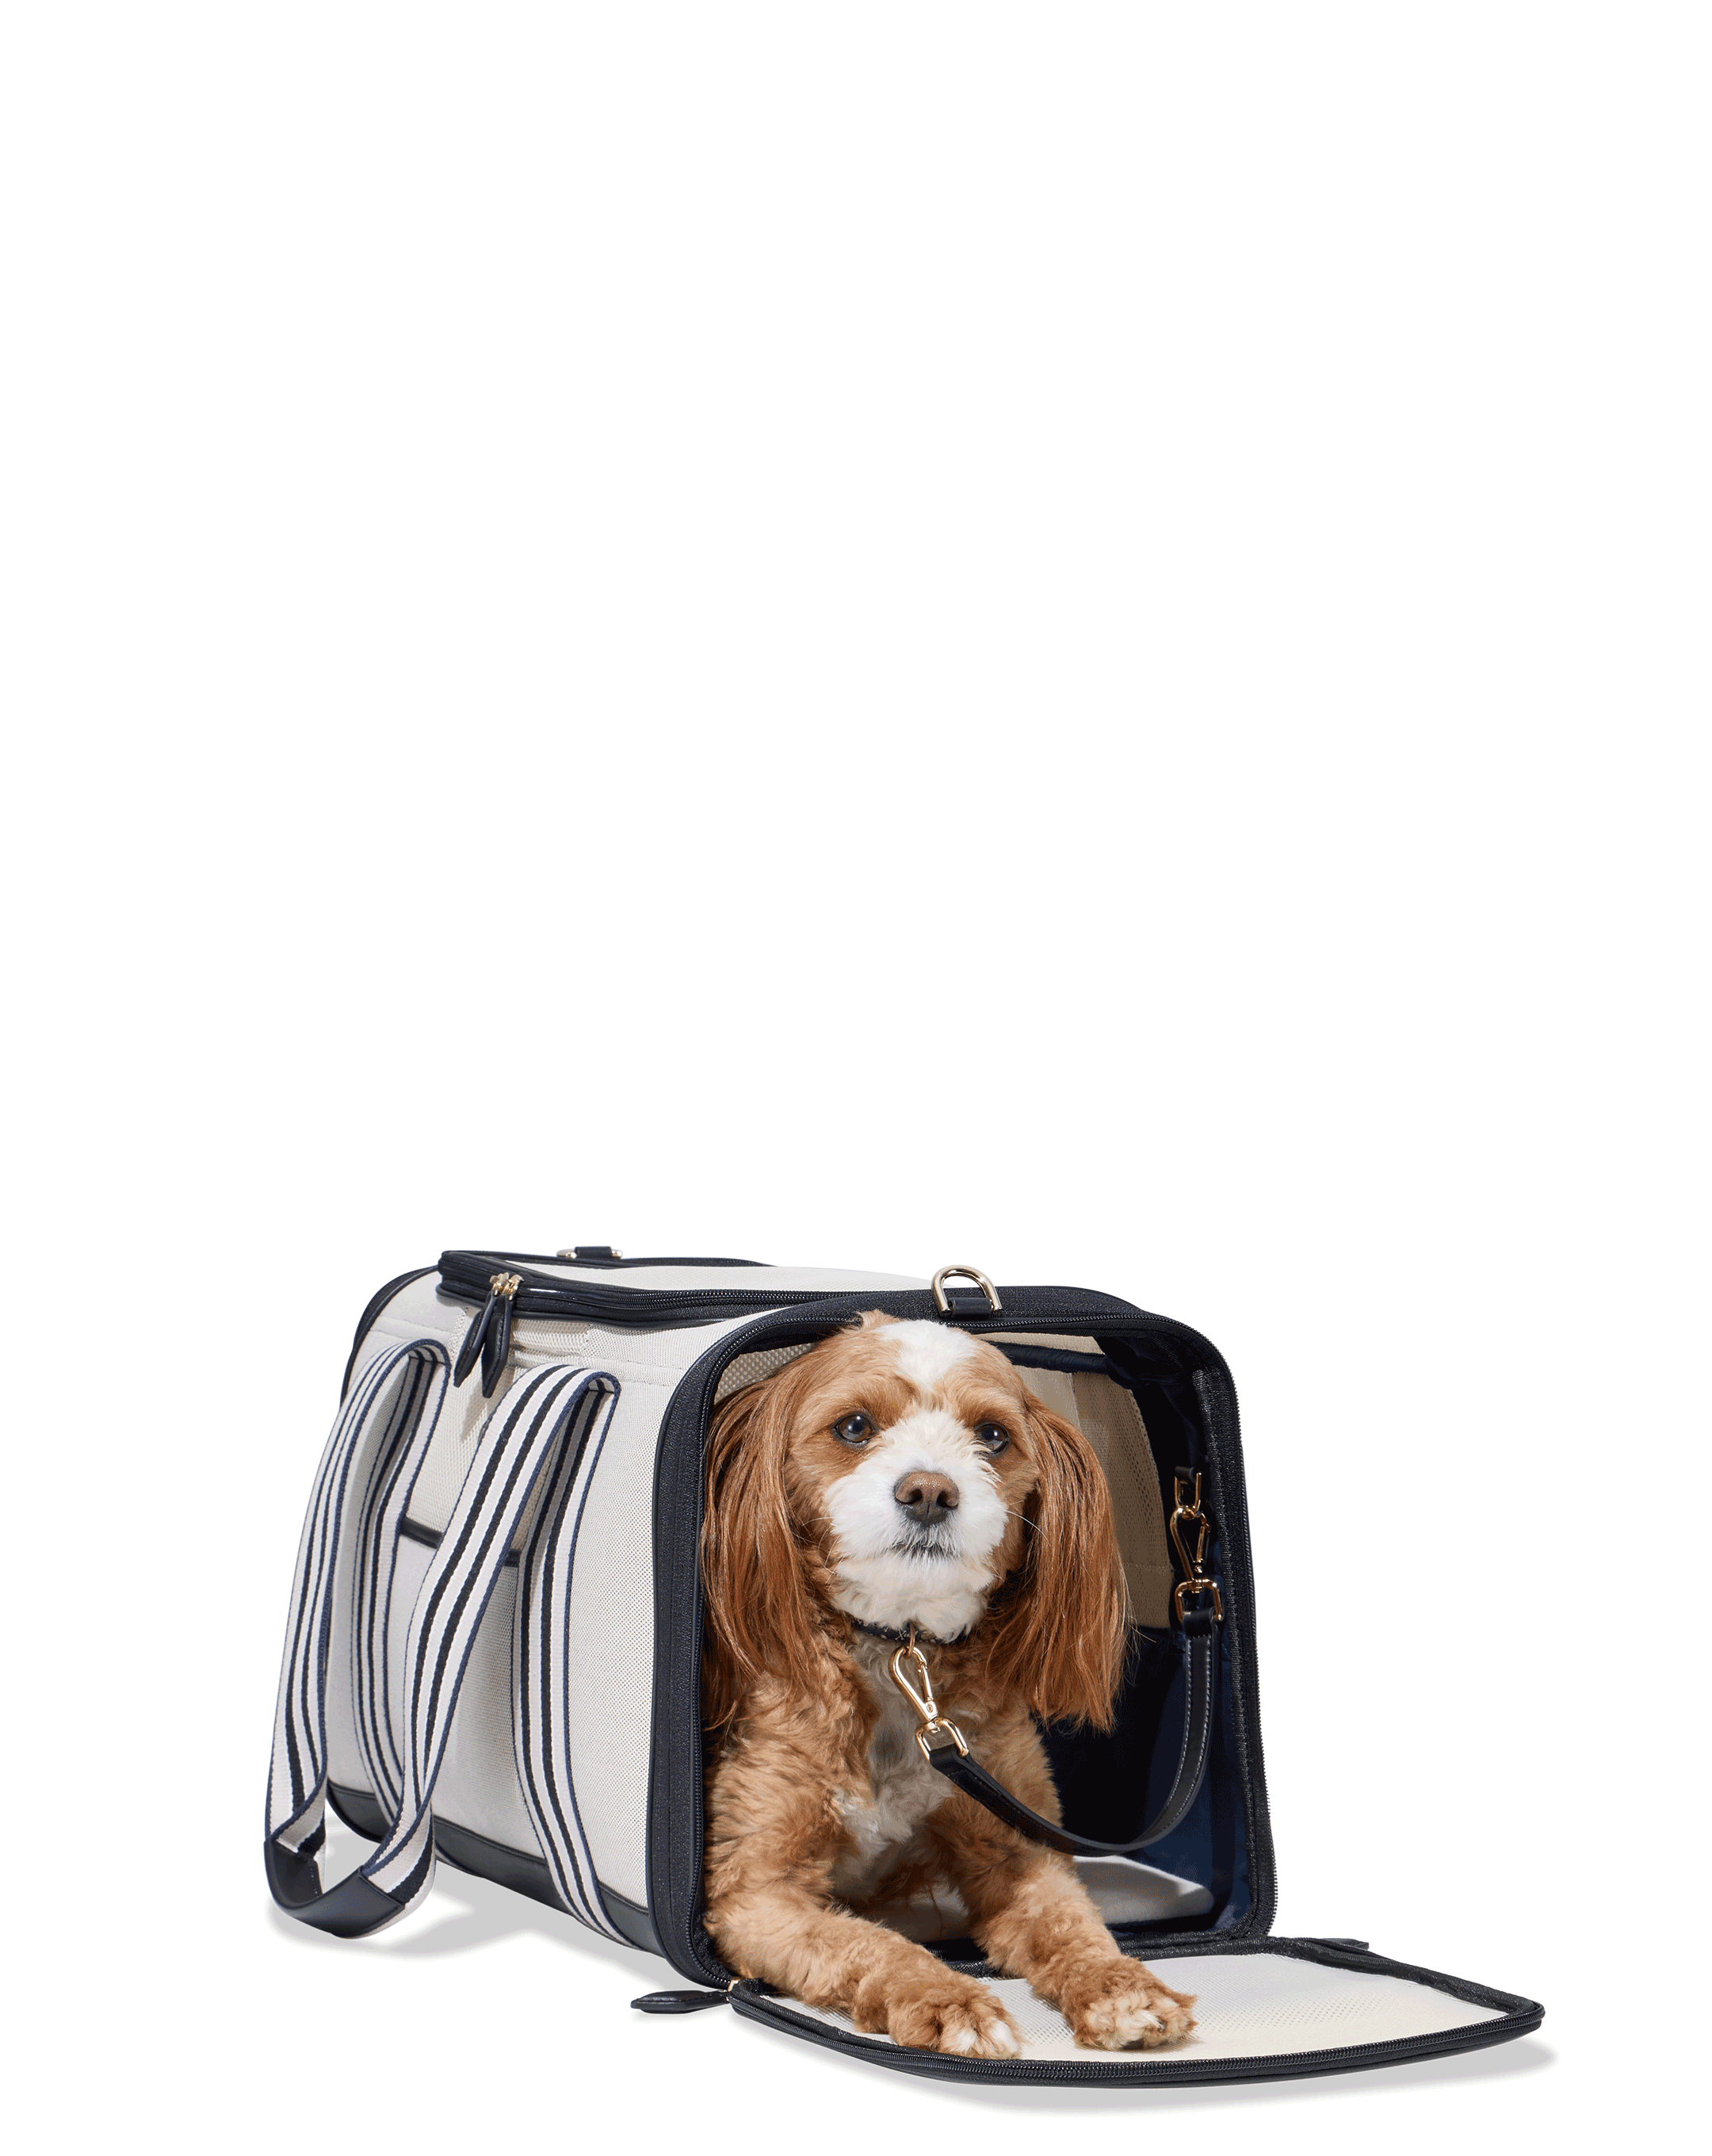 Away Pet Carrier Review: Best Dog Carrier for the Airplane